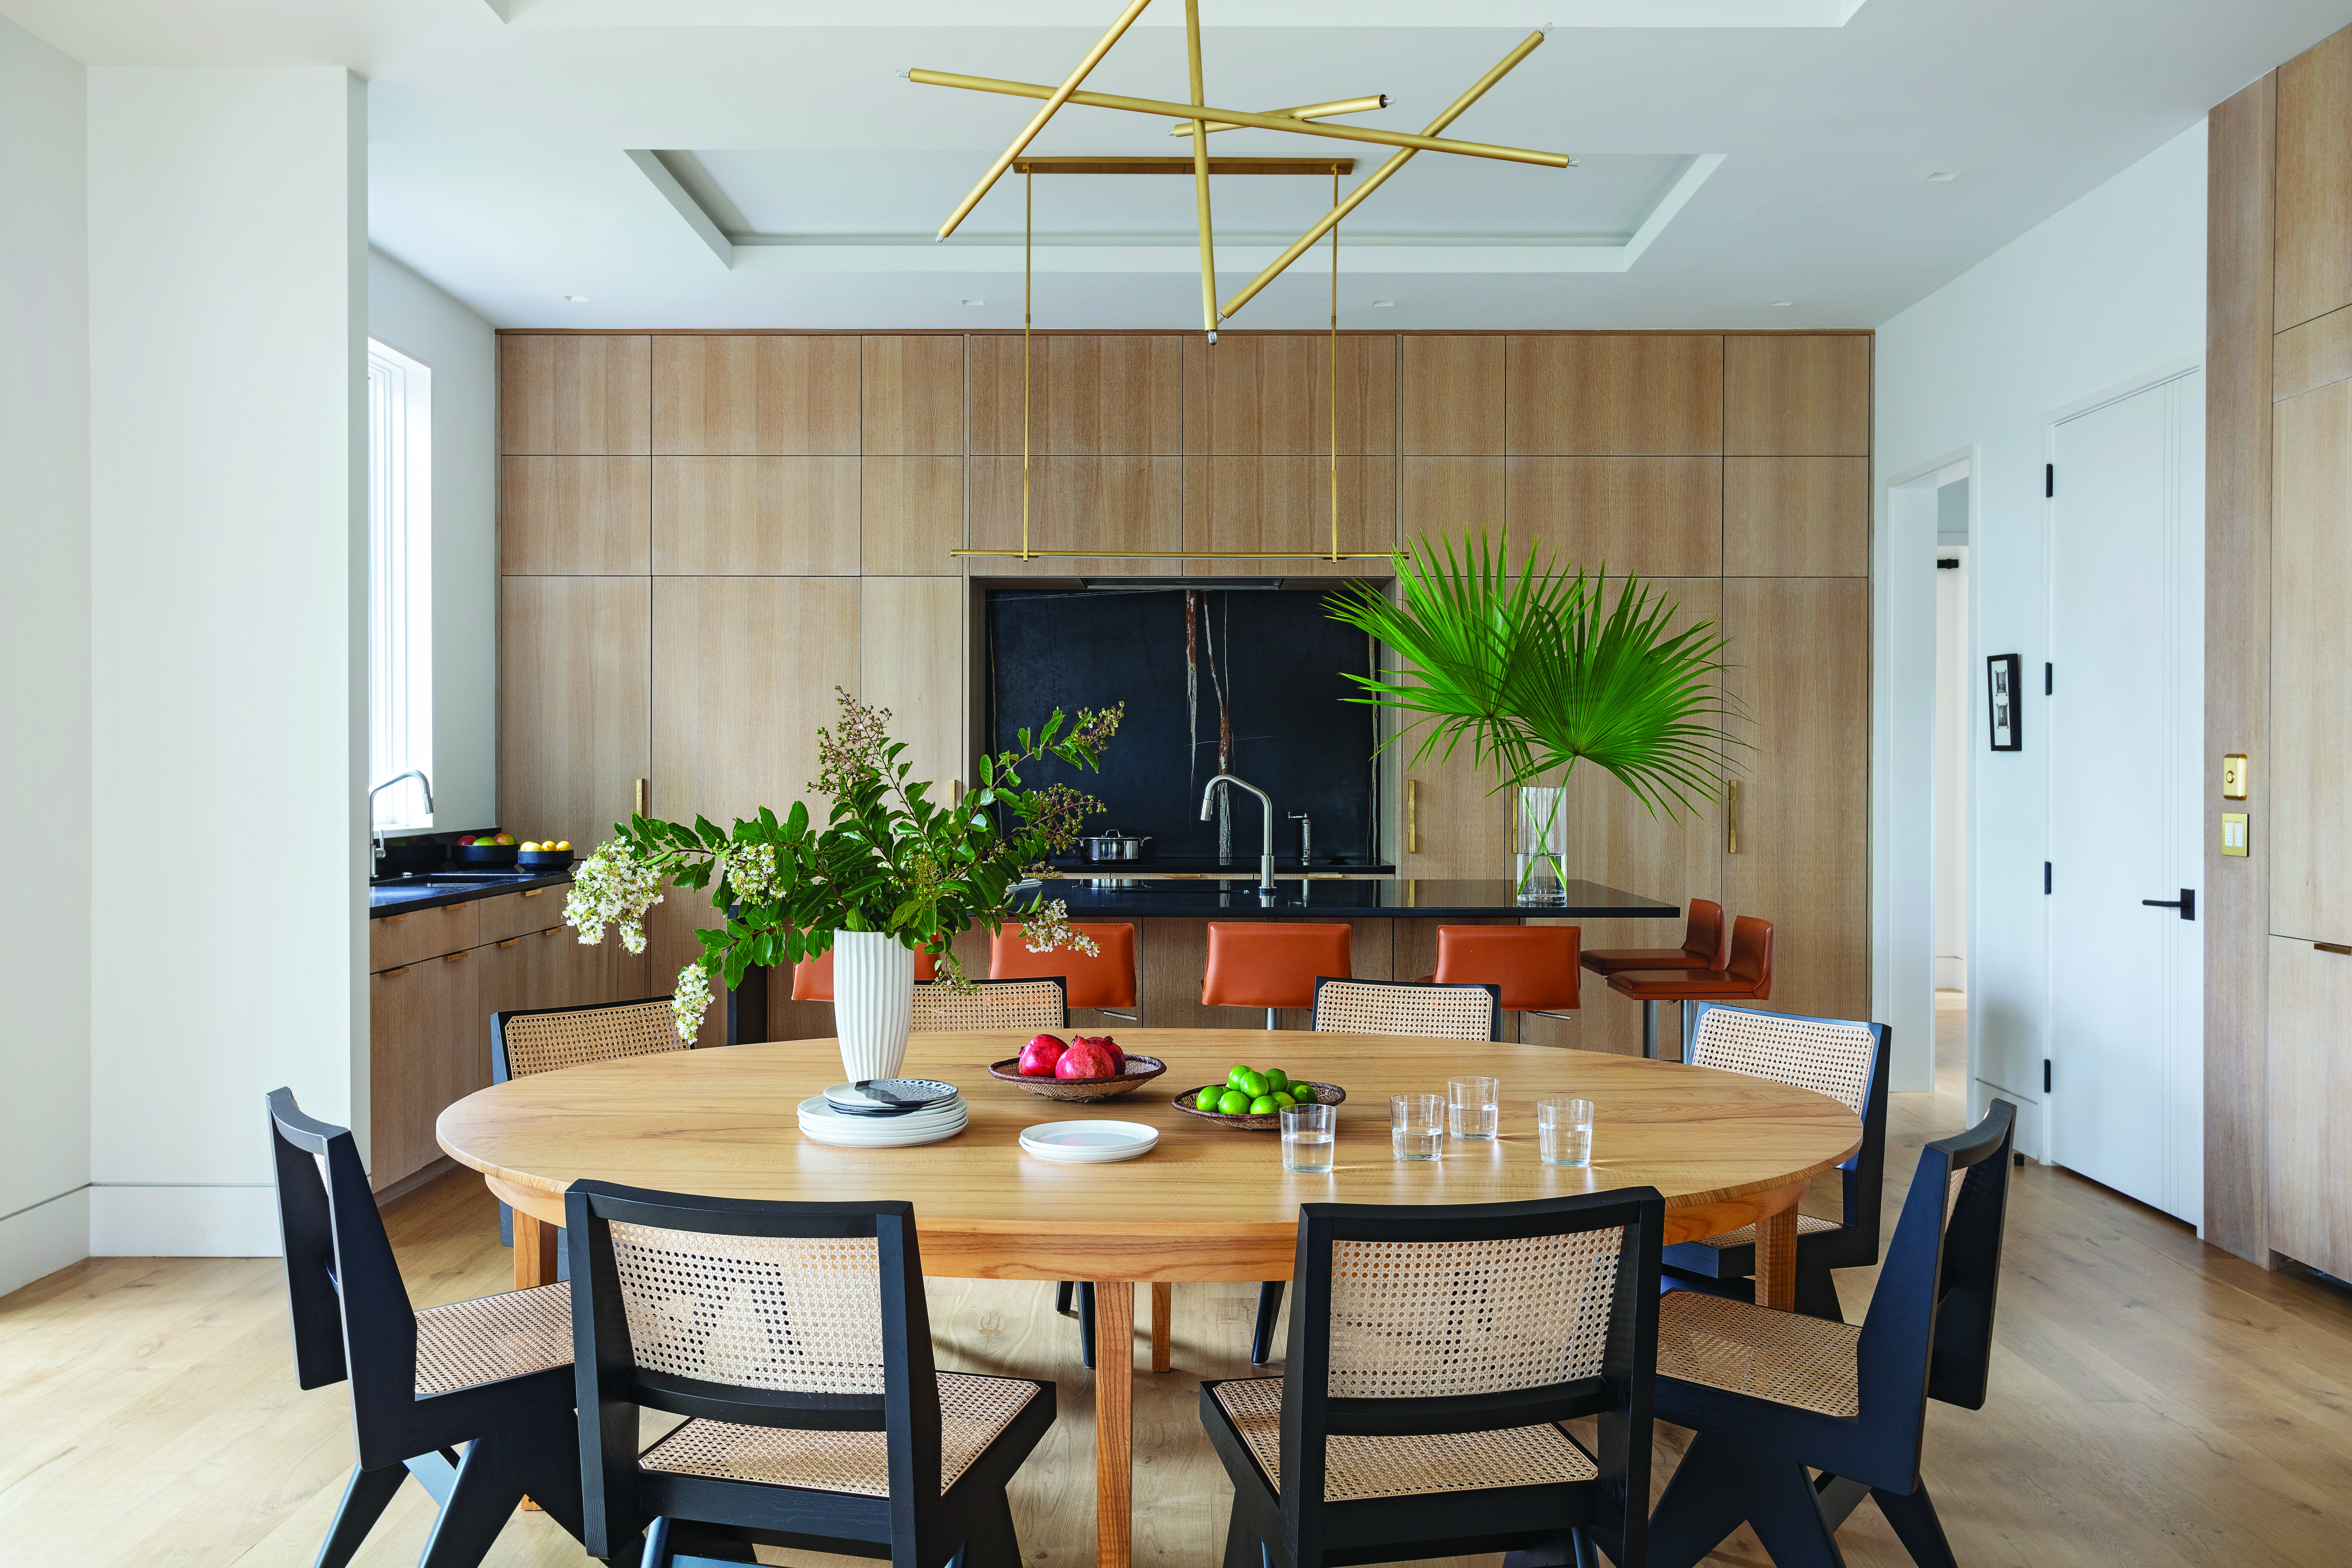 Modern Minimalism: The open dining/kitchen space is centered on the oval table the couple inherited from the prior owners of their midcentury modern home in Columbia. The table is accented by a custom Cam Crockford “pick-up stick” brass light fixture and black wicker chairs, which pull from the striking slab of Nero Dorato marble in the backsplash and quartzite countertops. An outdoor dining space can join the room thanks to accordion doors and retractable screens.